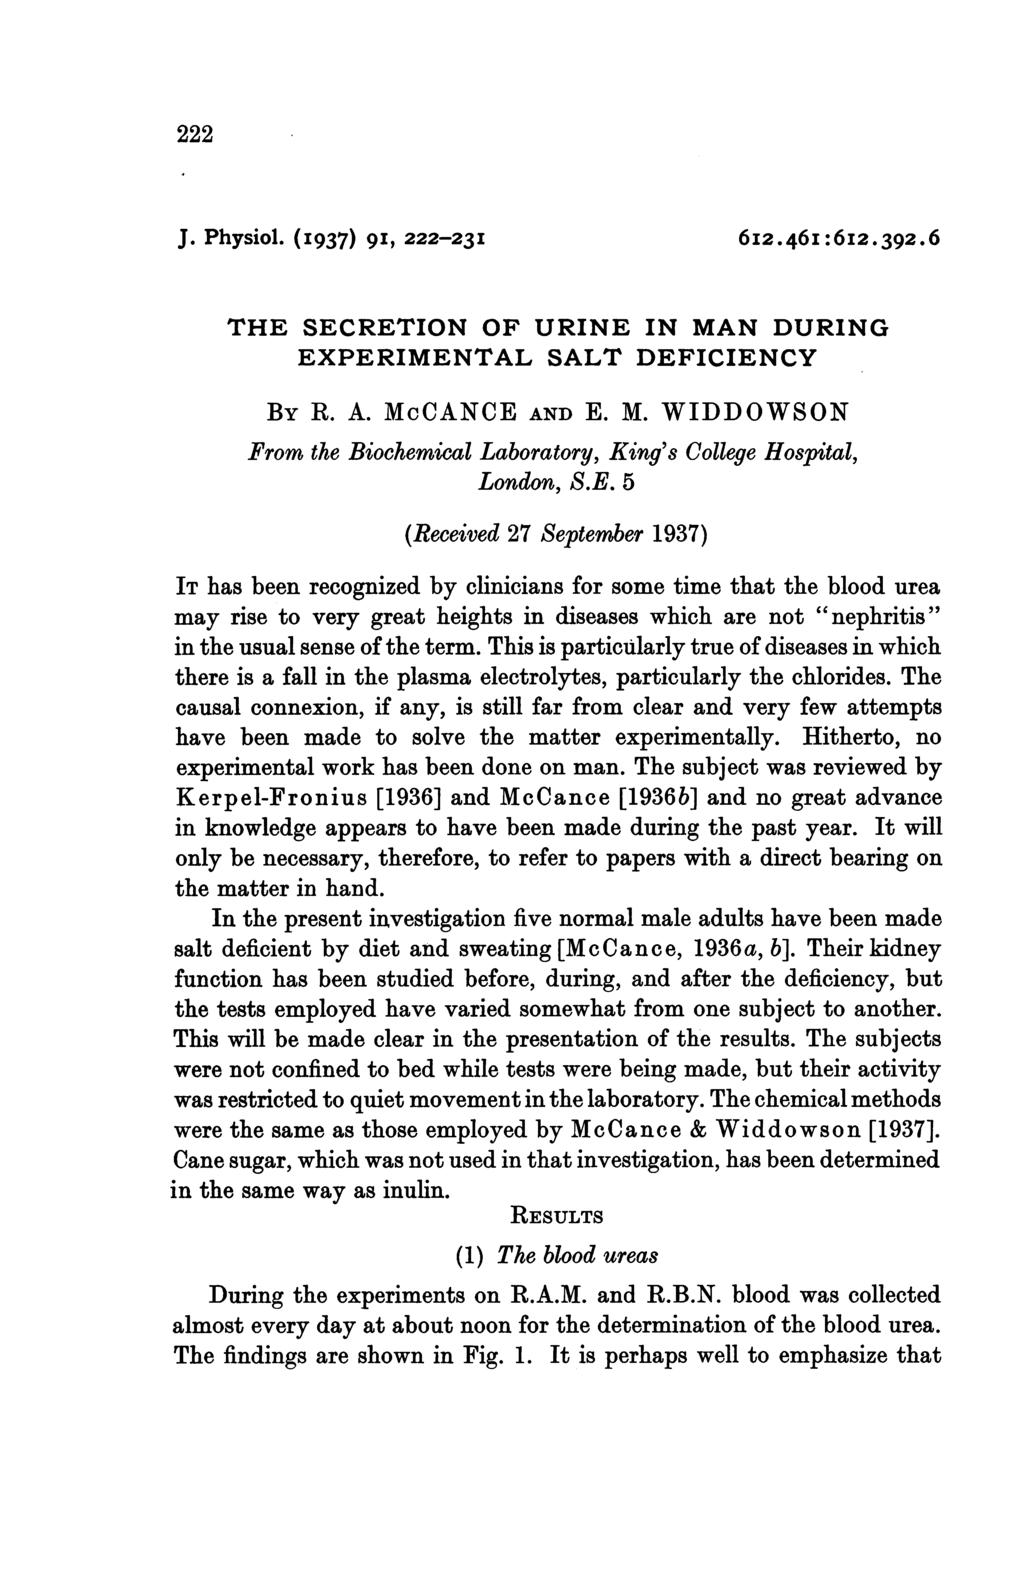 222 J. Physiol. (I937) 9I, 222-23I 6I2.46I:6I2.392.6 THE SECRETION OF URINE IN MAN DURING EXPERIMENTAL SALT DEFICIENCY BY R. A. McCANCE AND E. M. WIDDOWSON From the Biochemical Laboratory, King's College Hospital, London, S.